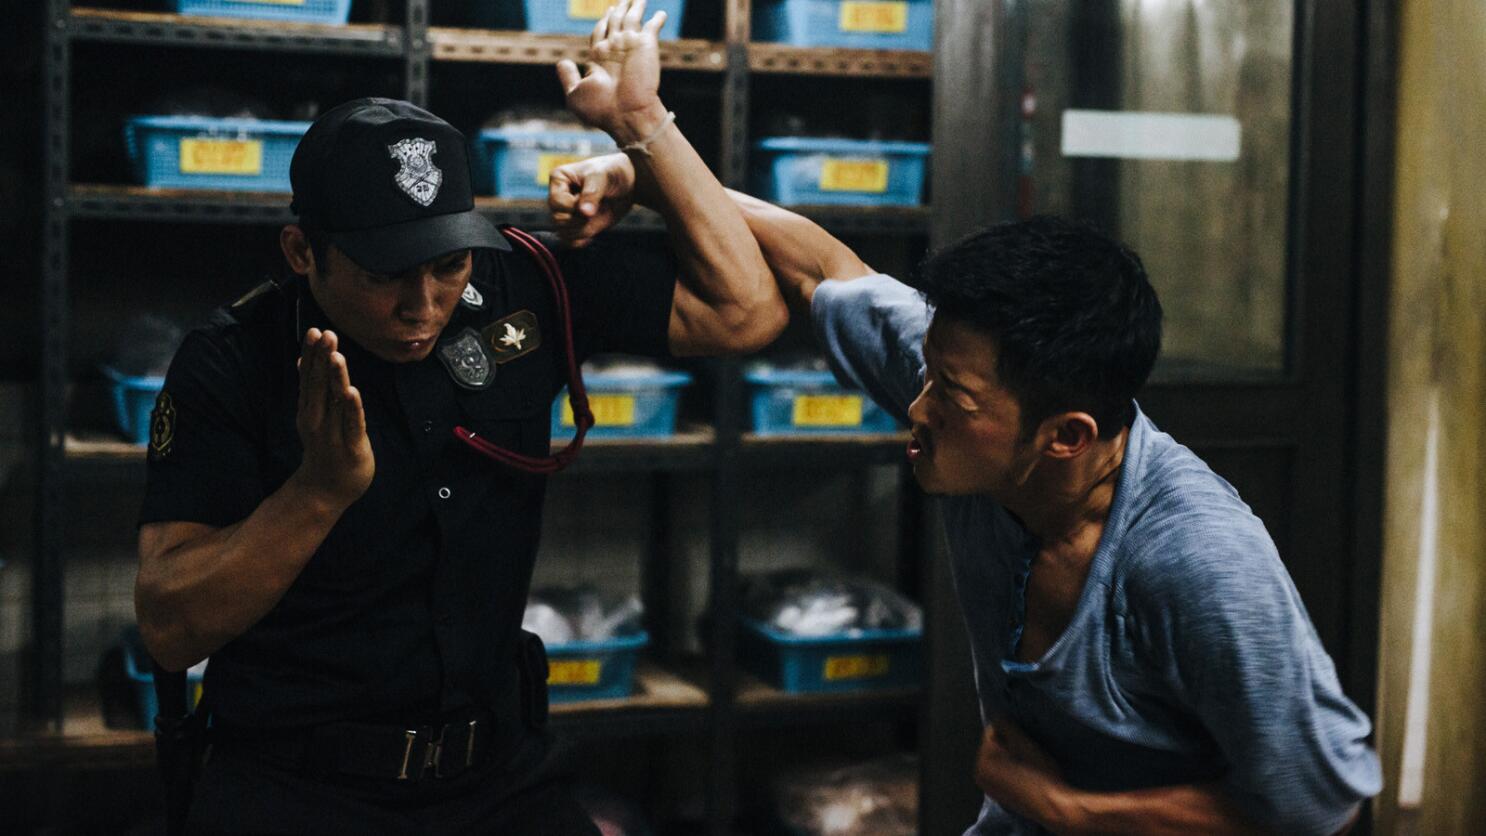 Review: KILL ZONE 2, A Delirious, Masterfully Staged Martial Arts